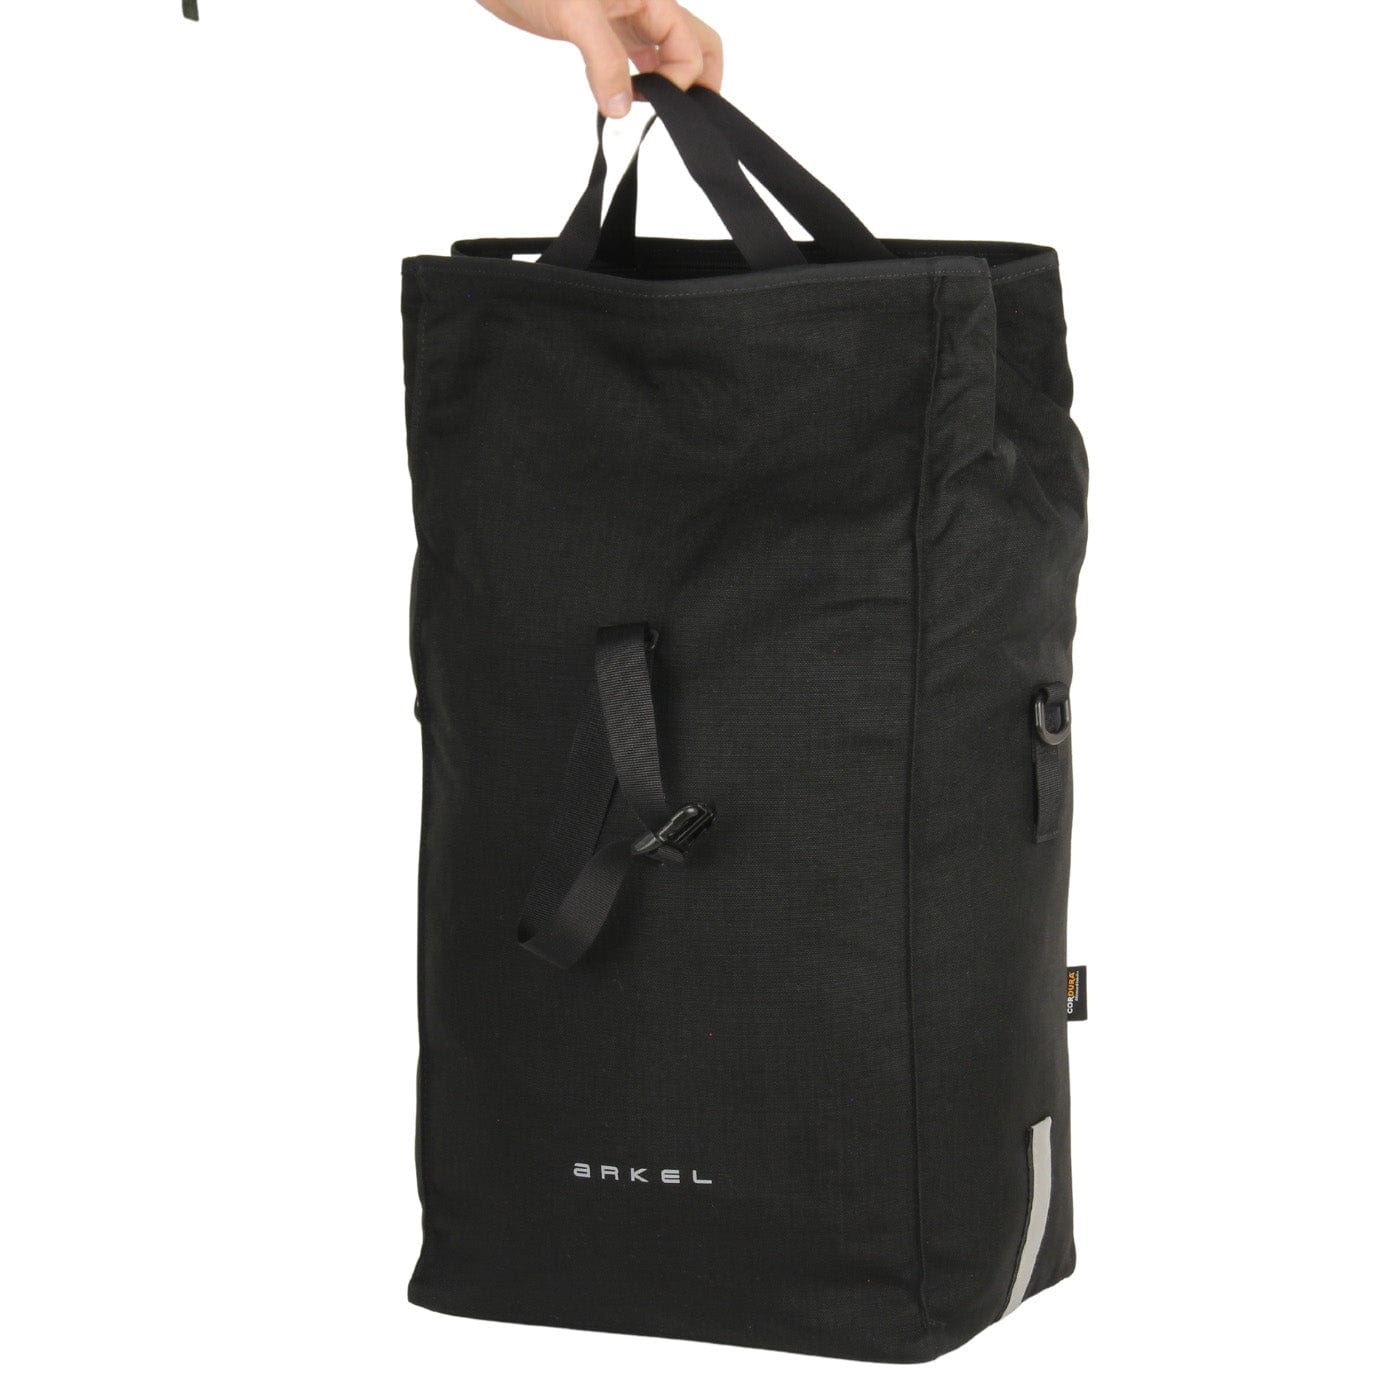 The Signature V waterproof urban laptop pannier can be carried with two shopping bag style carry handles located at the top of the bag when fully open 